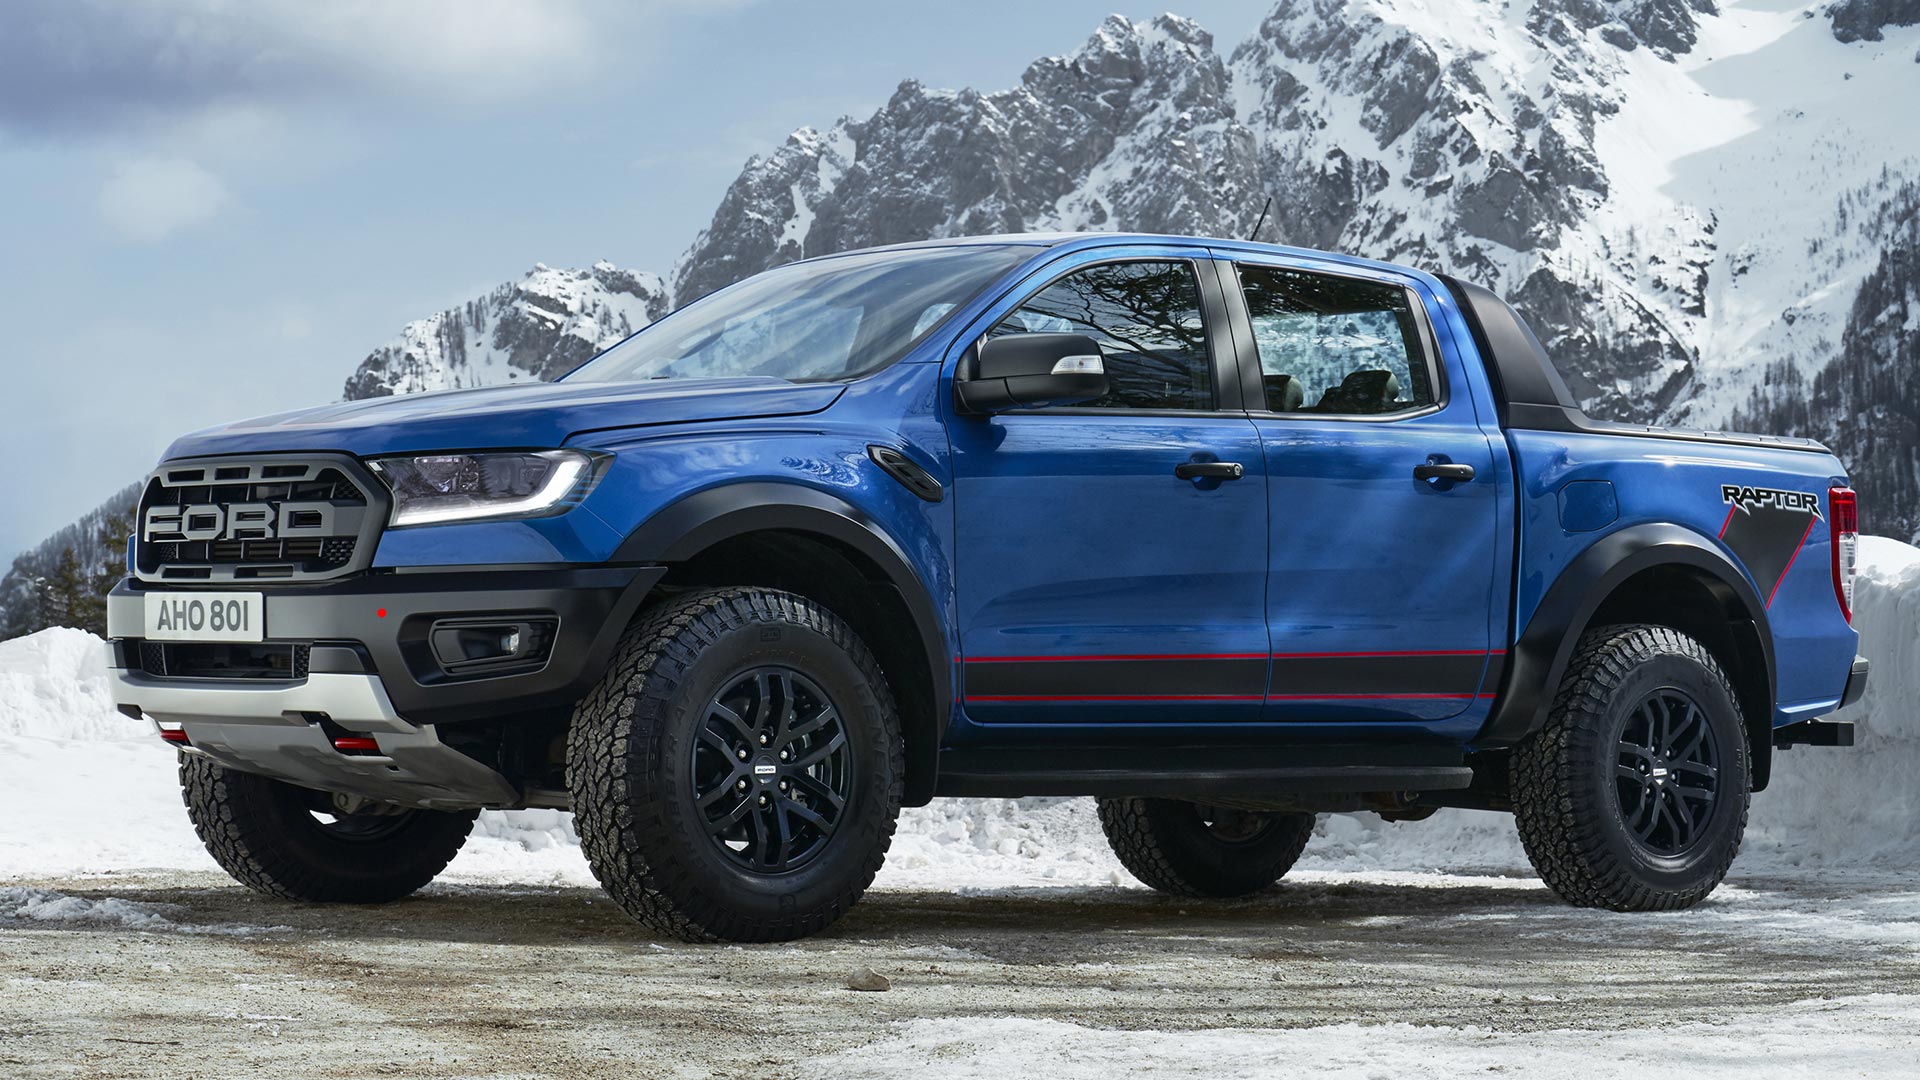 2021 Ford Ranger Raptor Special Edition: Launch, Specs, Features